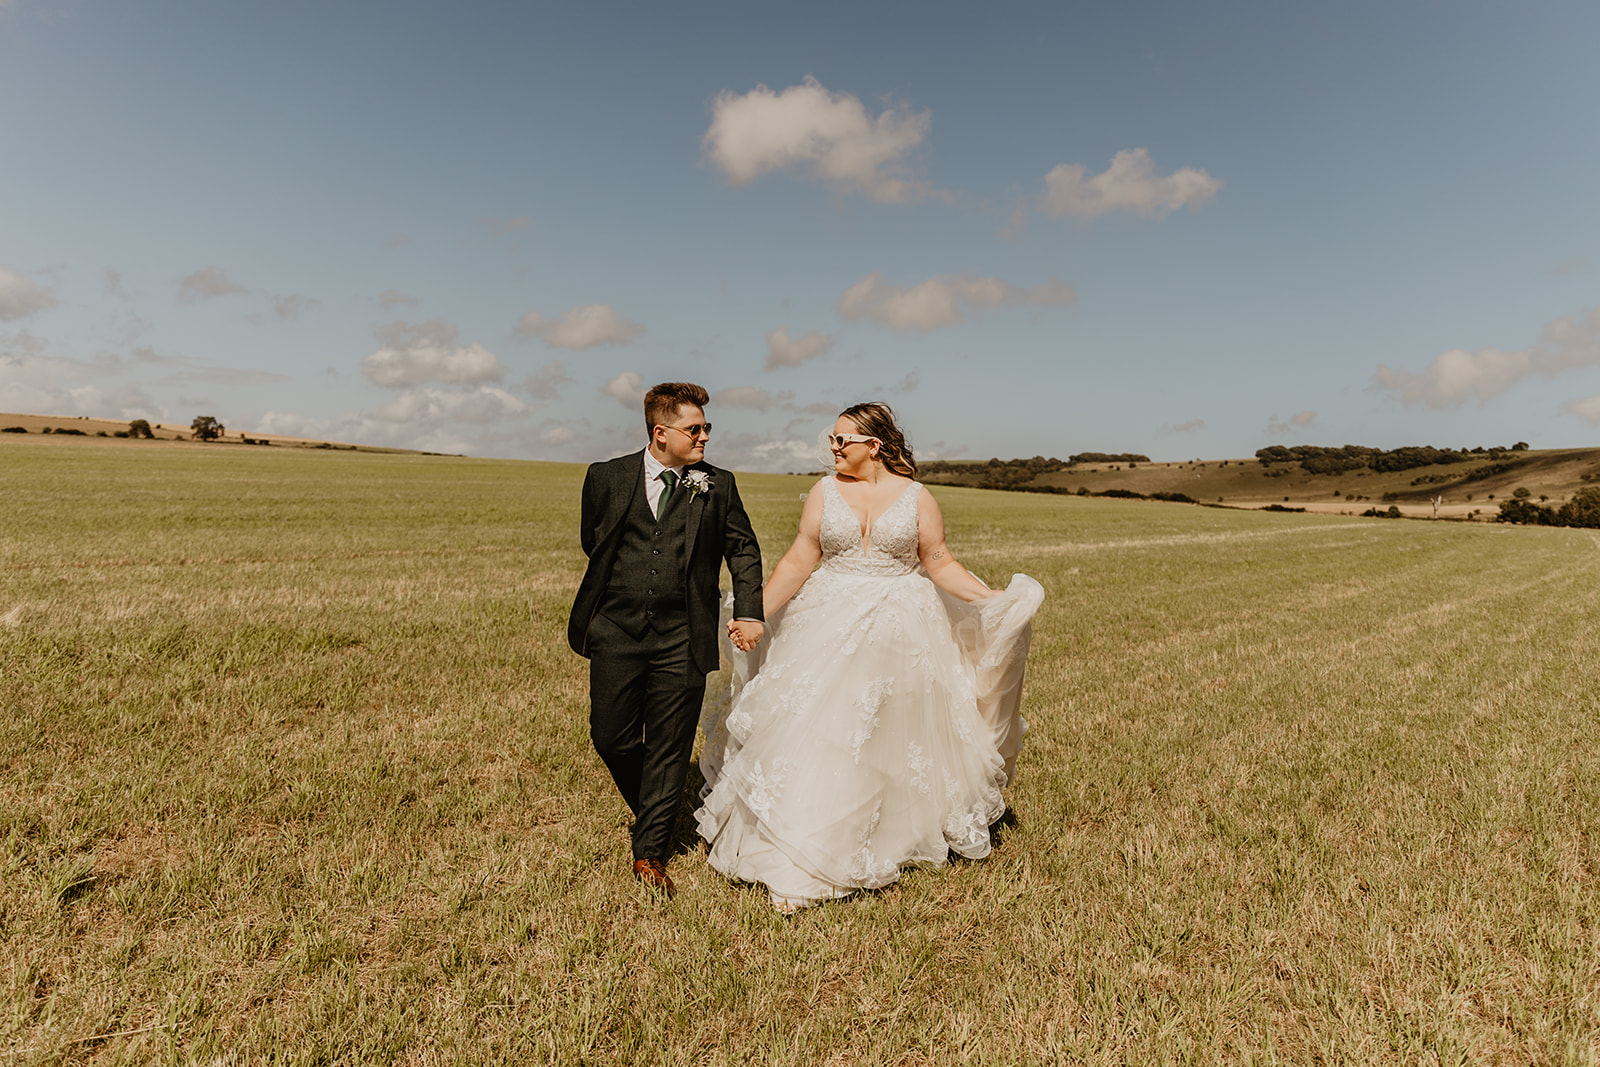 Bride and Groom at a Long Furlong Barn Wedding in Worthing, Sussex. By Olive Joy Photography.